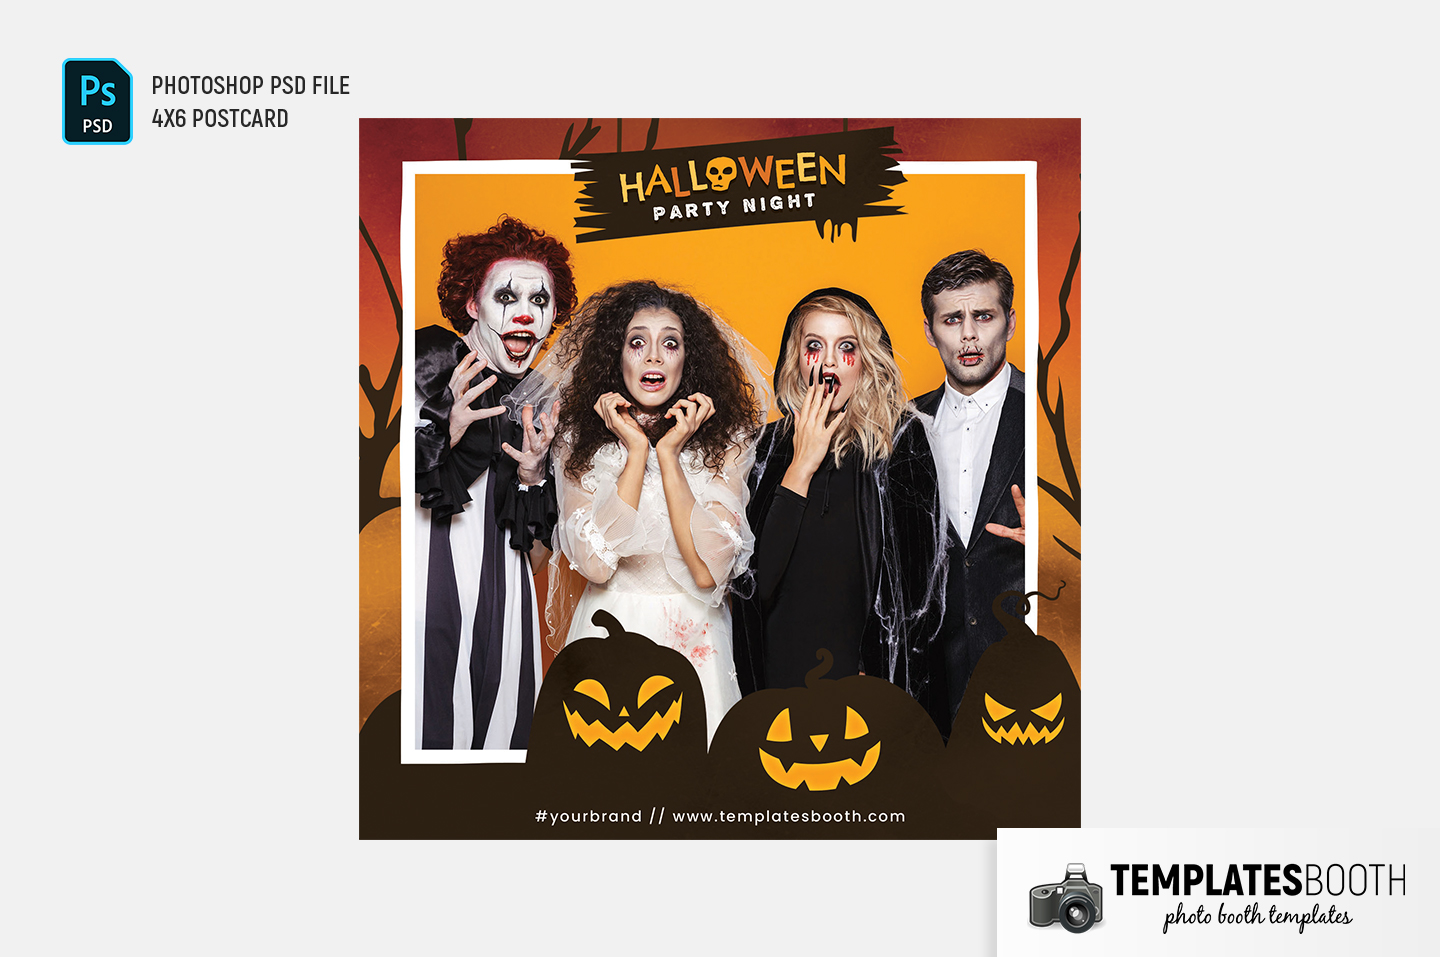 Halloween Party Photo Booth Template (Snappic)